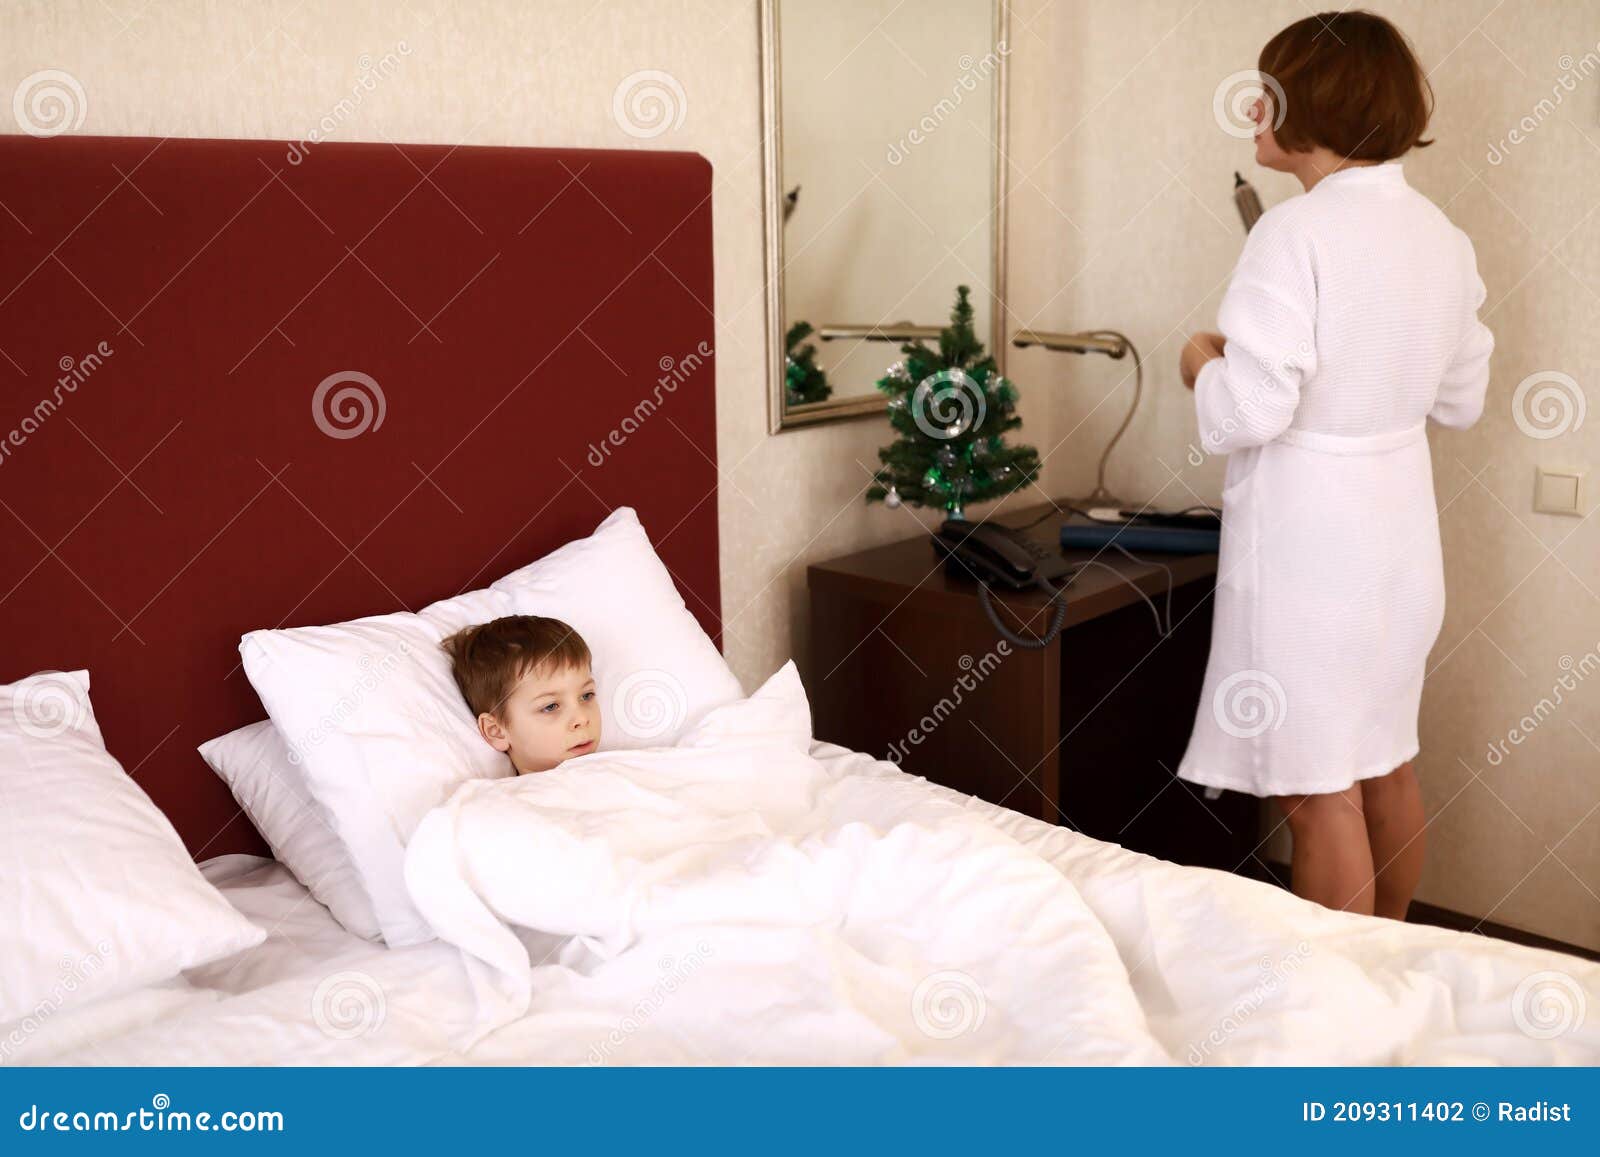 Mother With Son In Hotel Room Stock Photo Image Of Morning Asleep